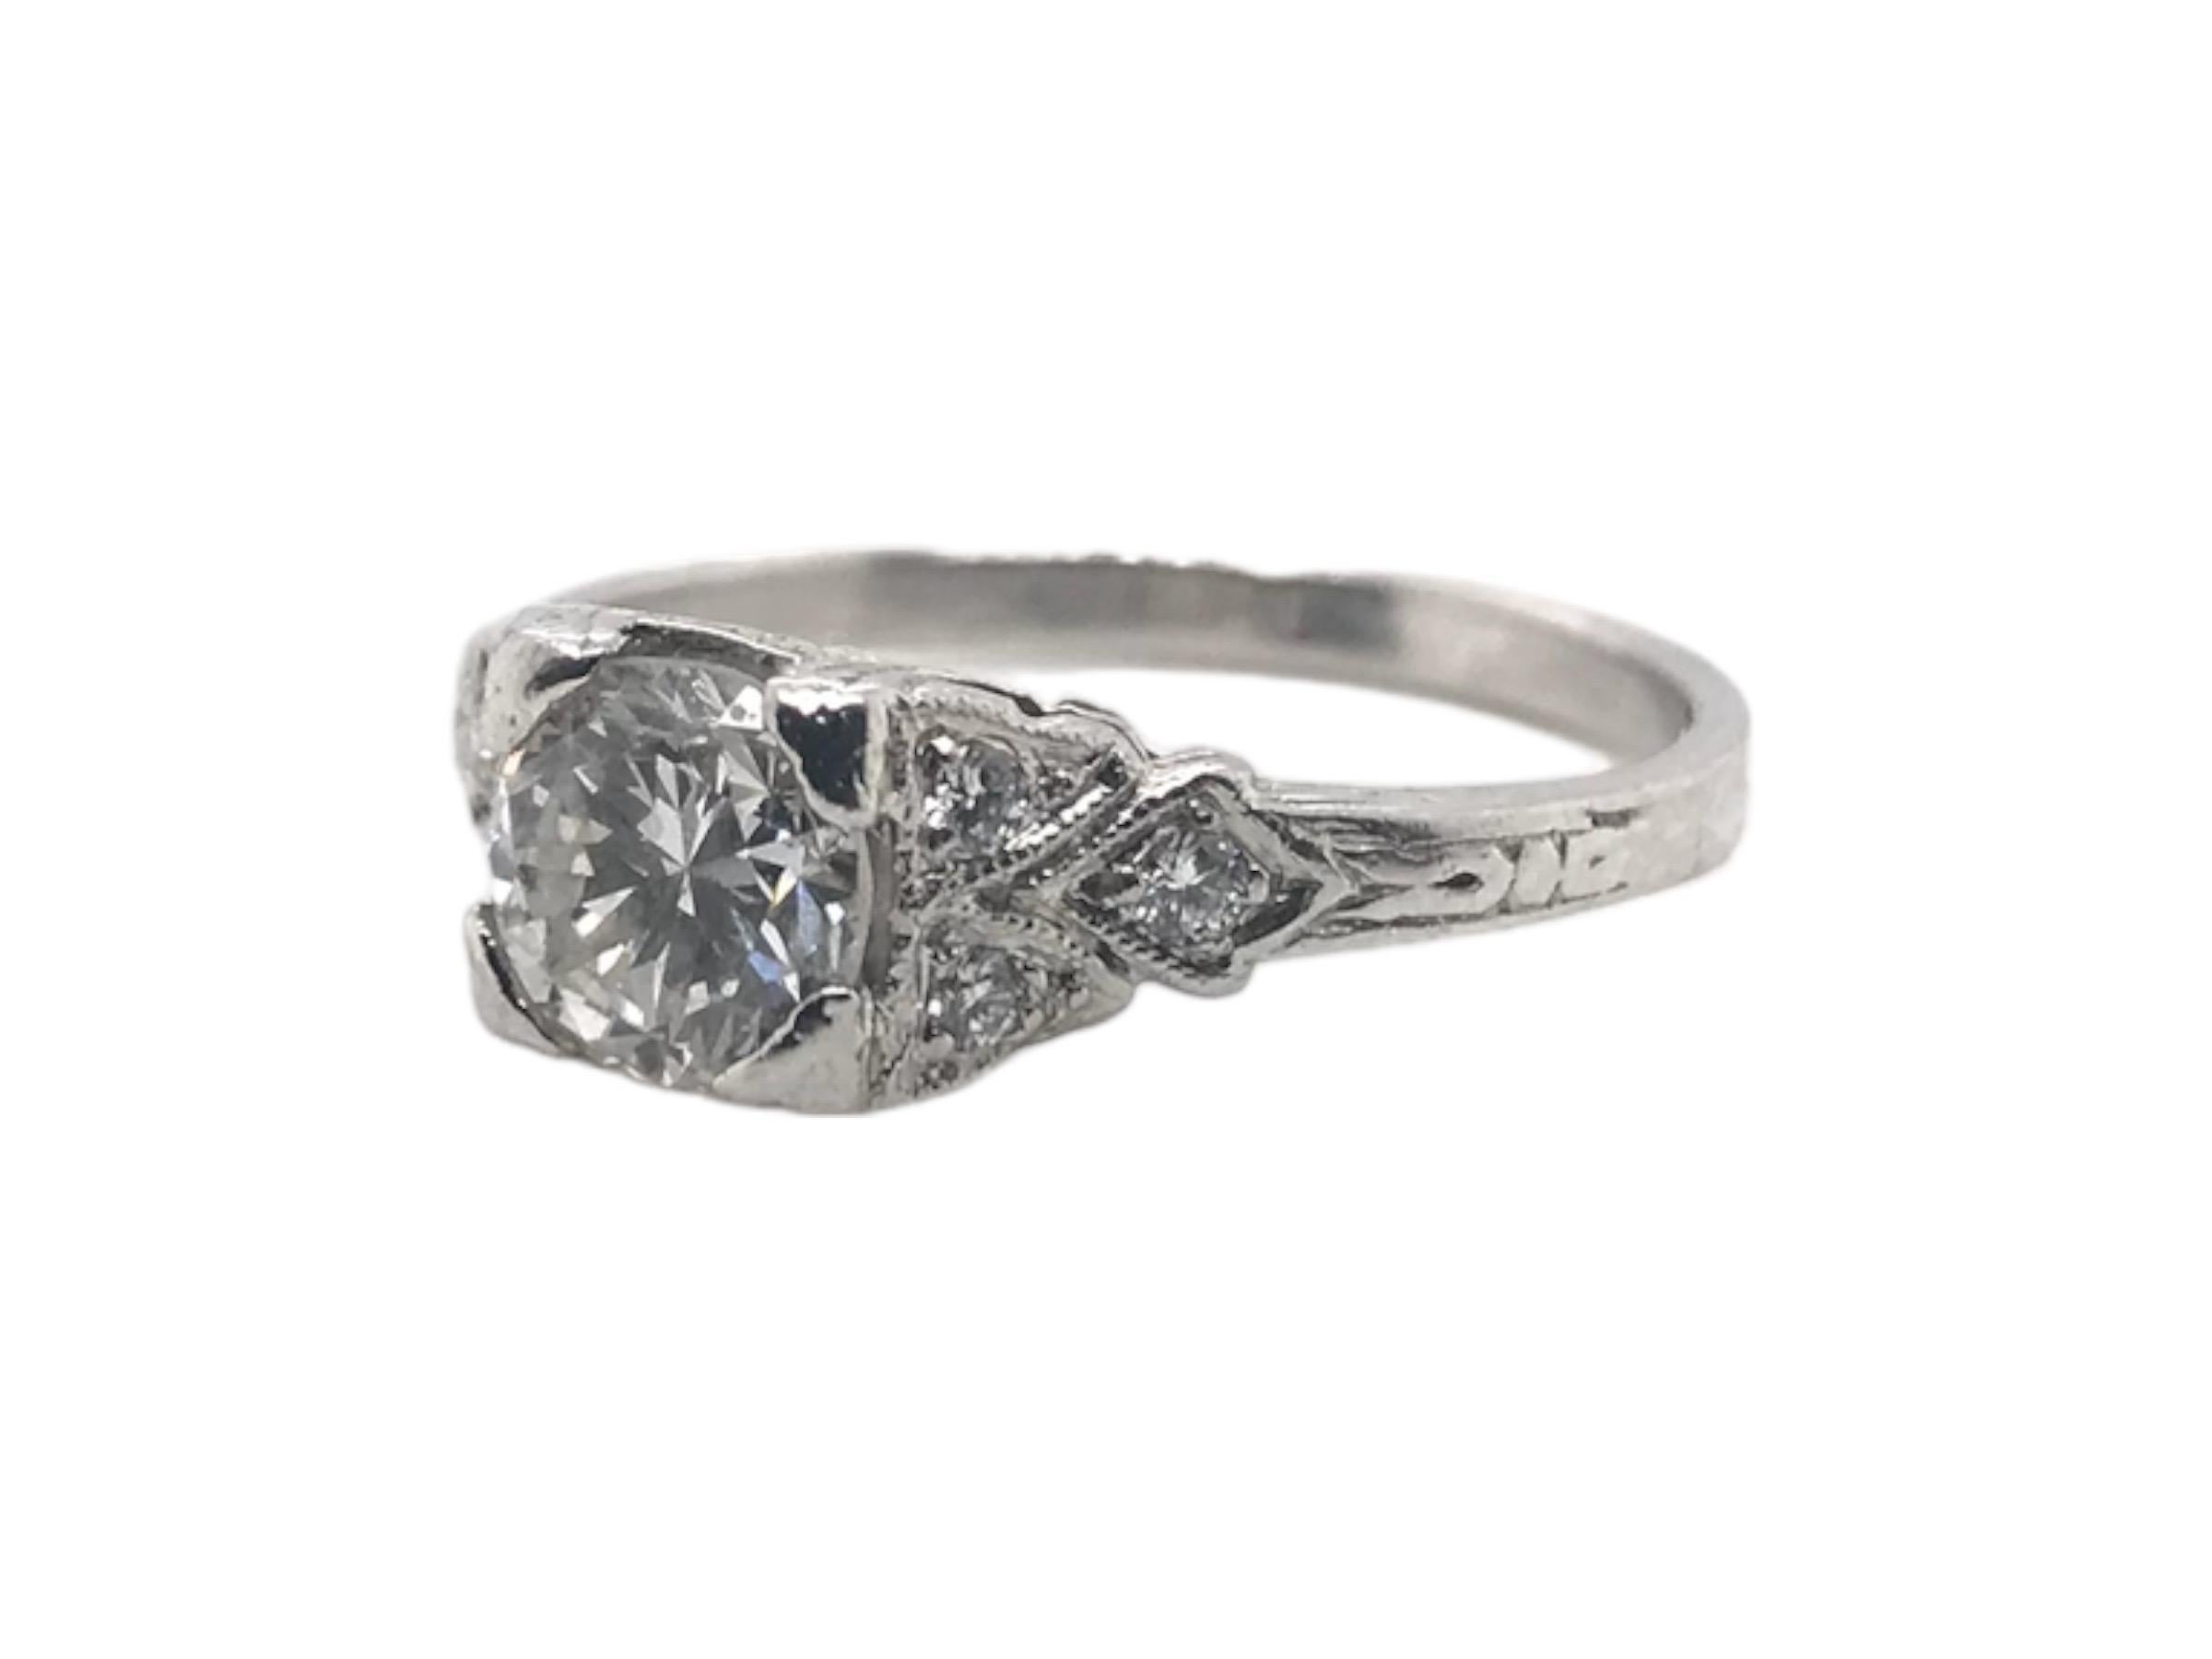 Art Deco Style 0.65 Carat Platinum Diamond Engagement Ring In Excellent Condition For Sale In Montgomery, AL